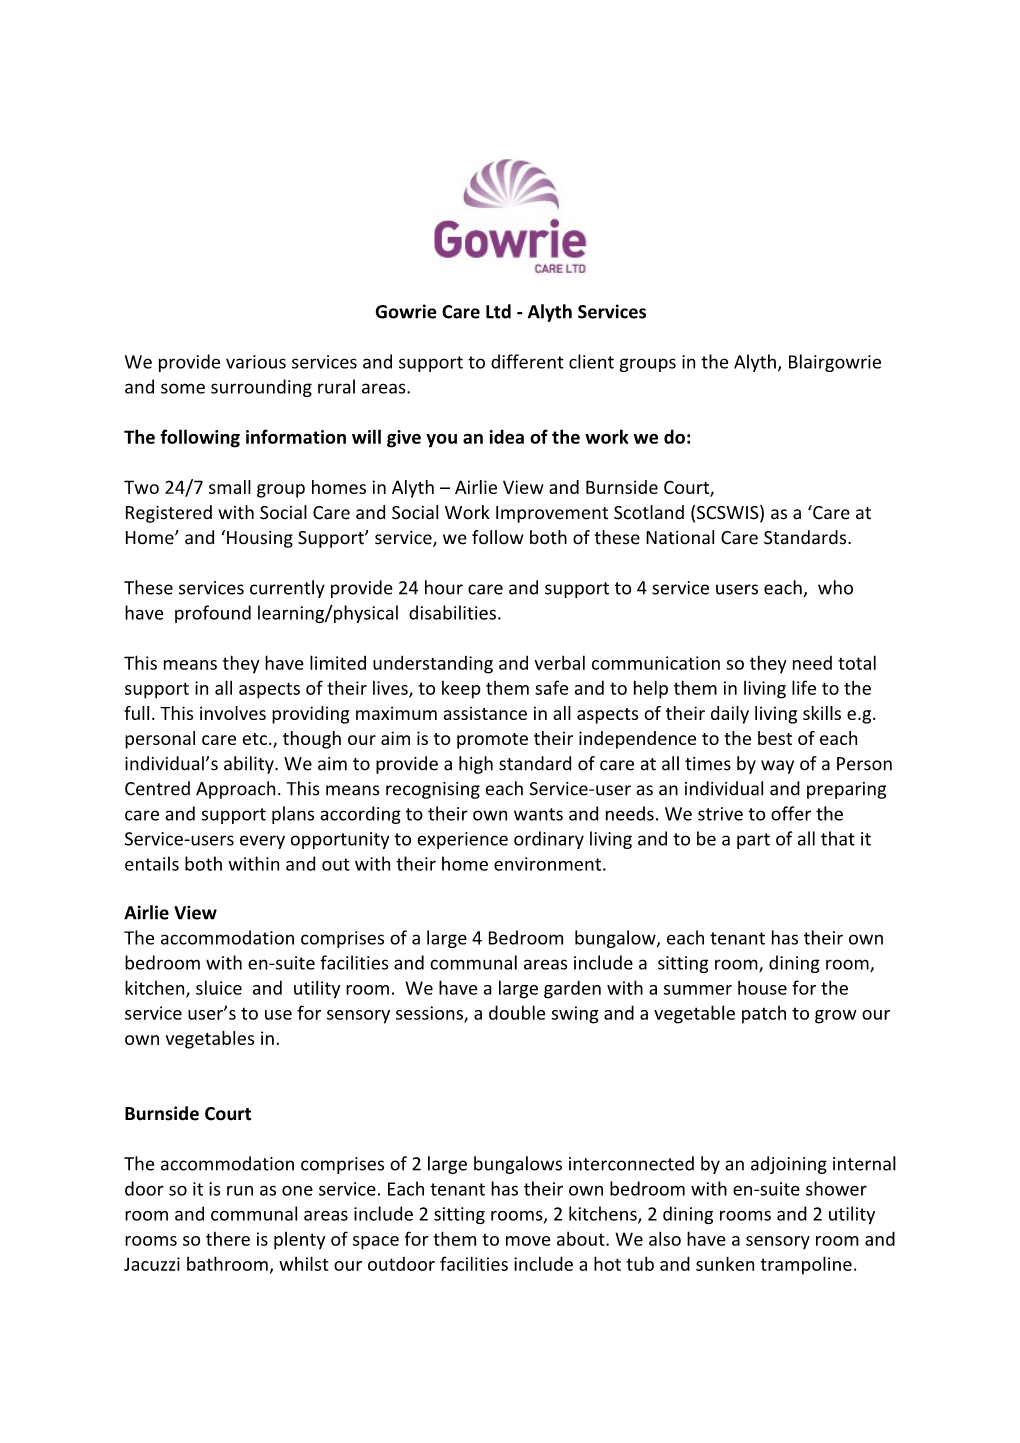 Gowrie Care Ltd Alyth Services Consists Of